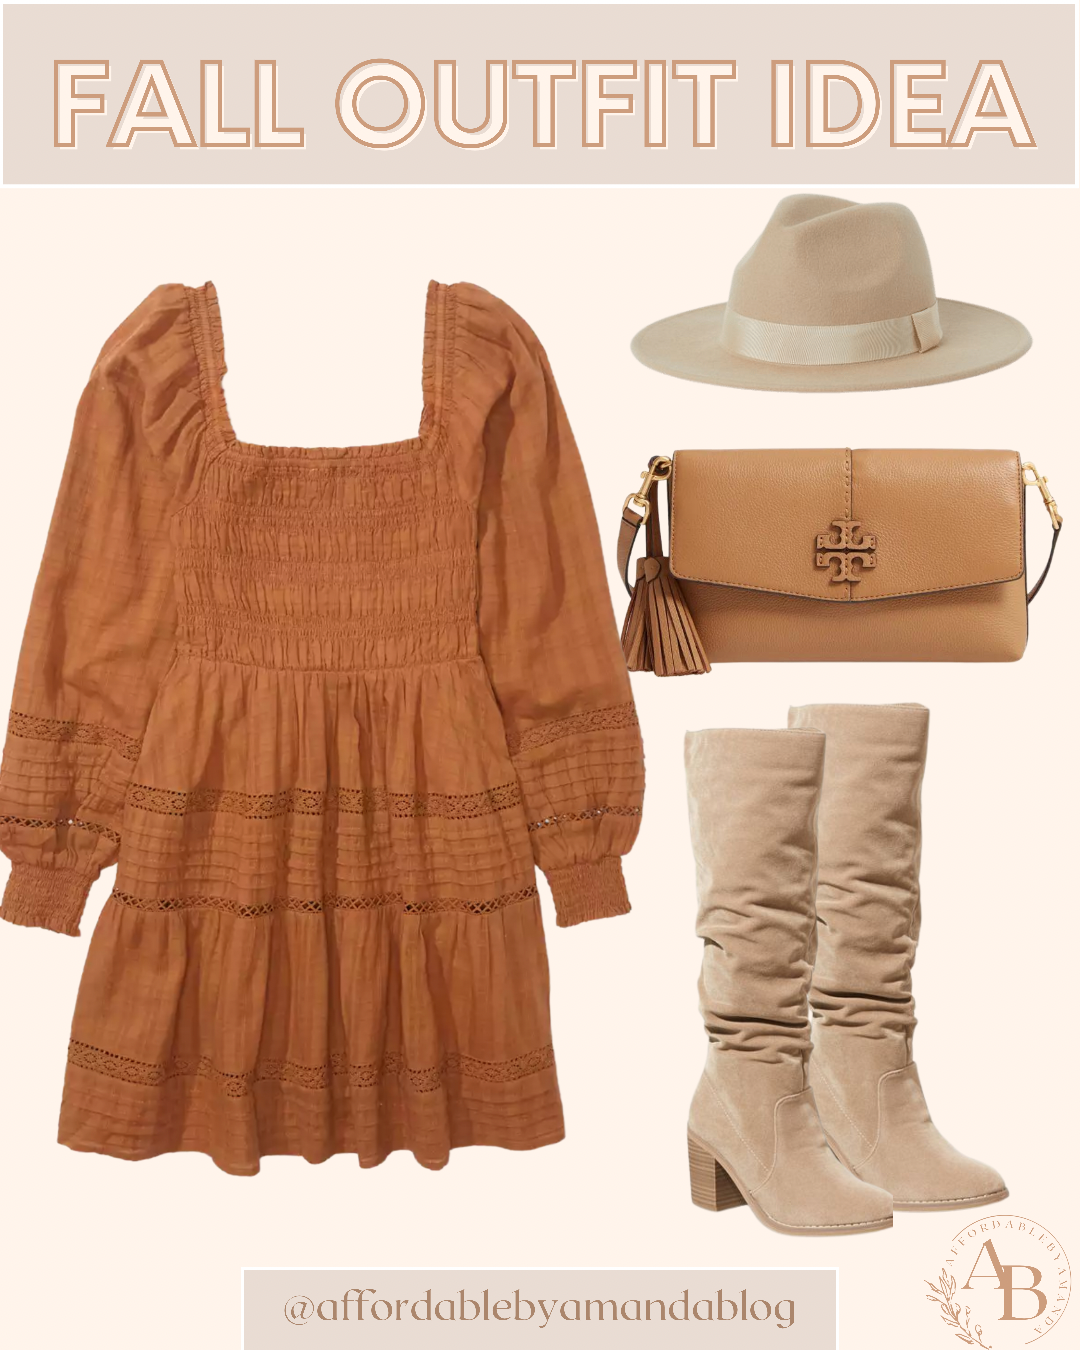 Fall Outfit Idea - Affordable by Amanda